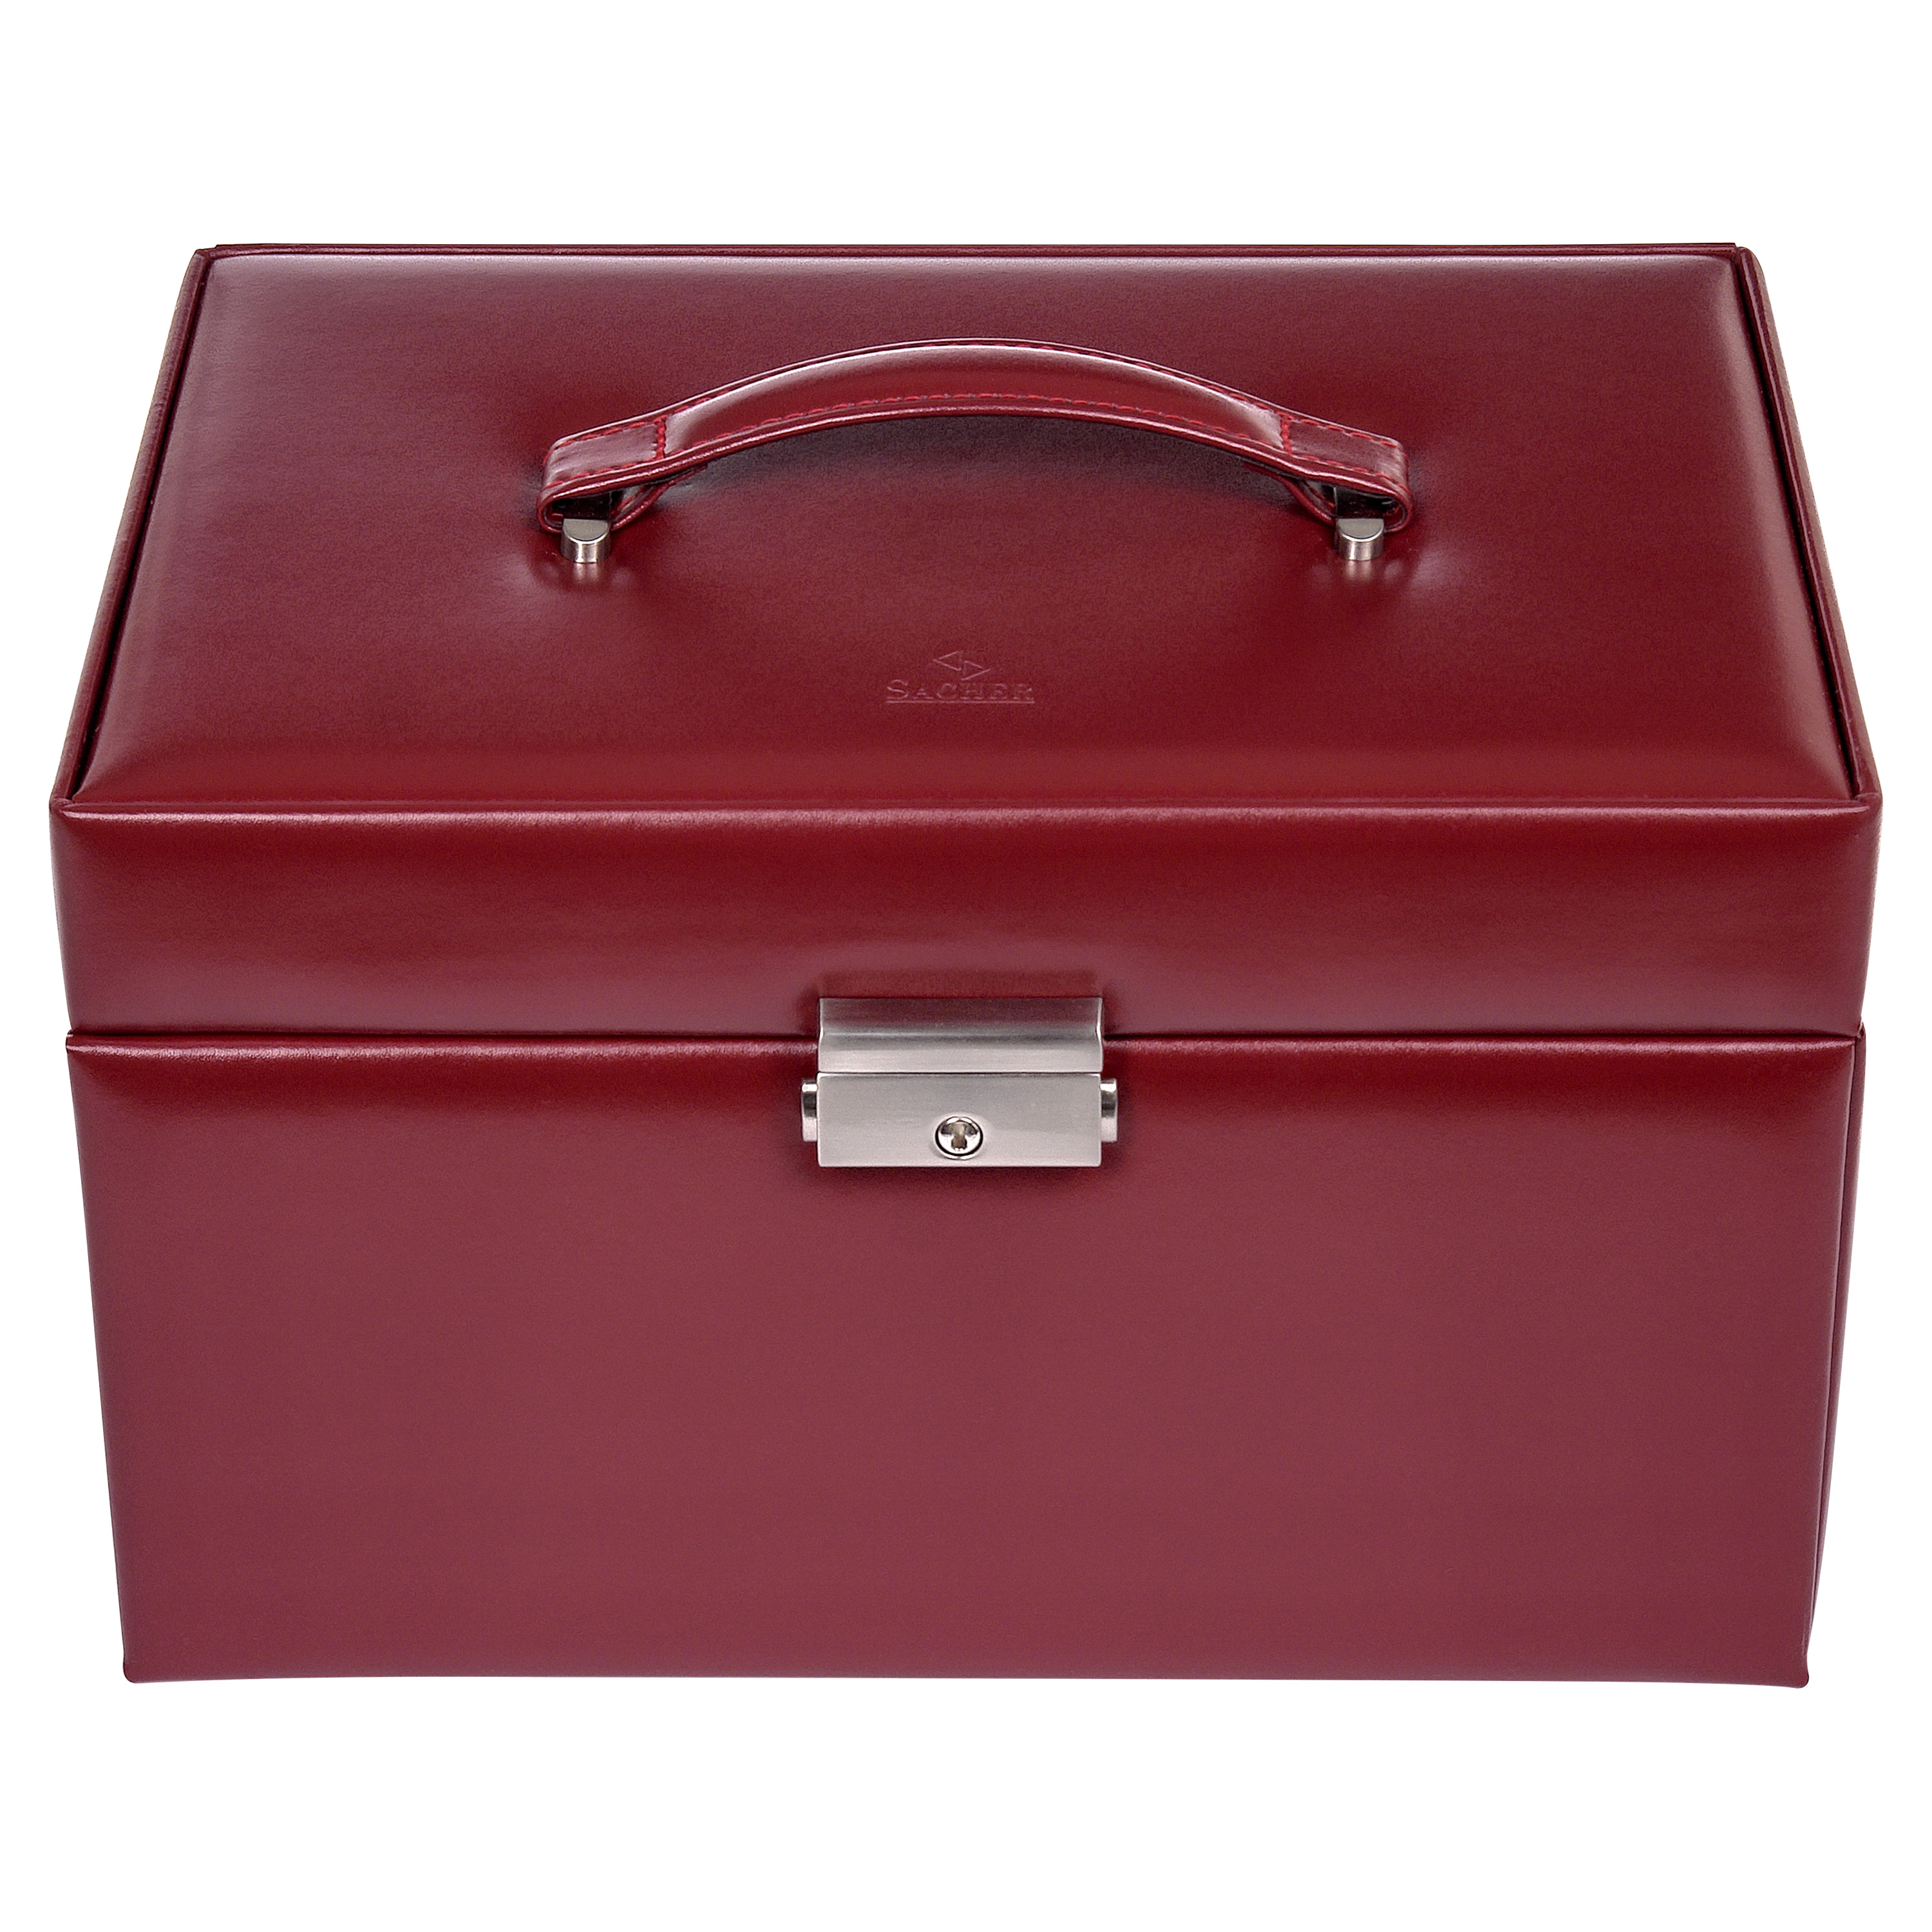 Jewellery box Lena new classic / red (leather) 